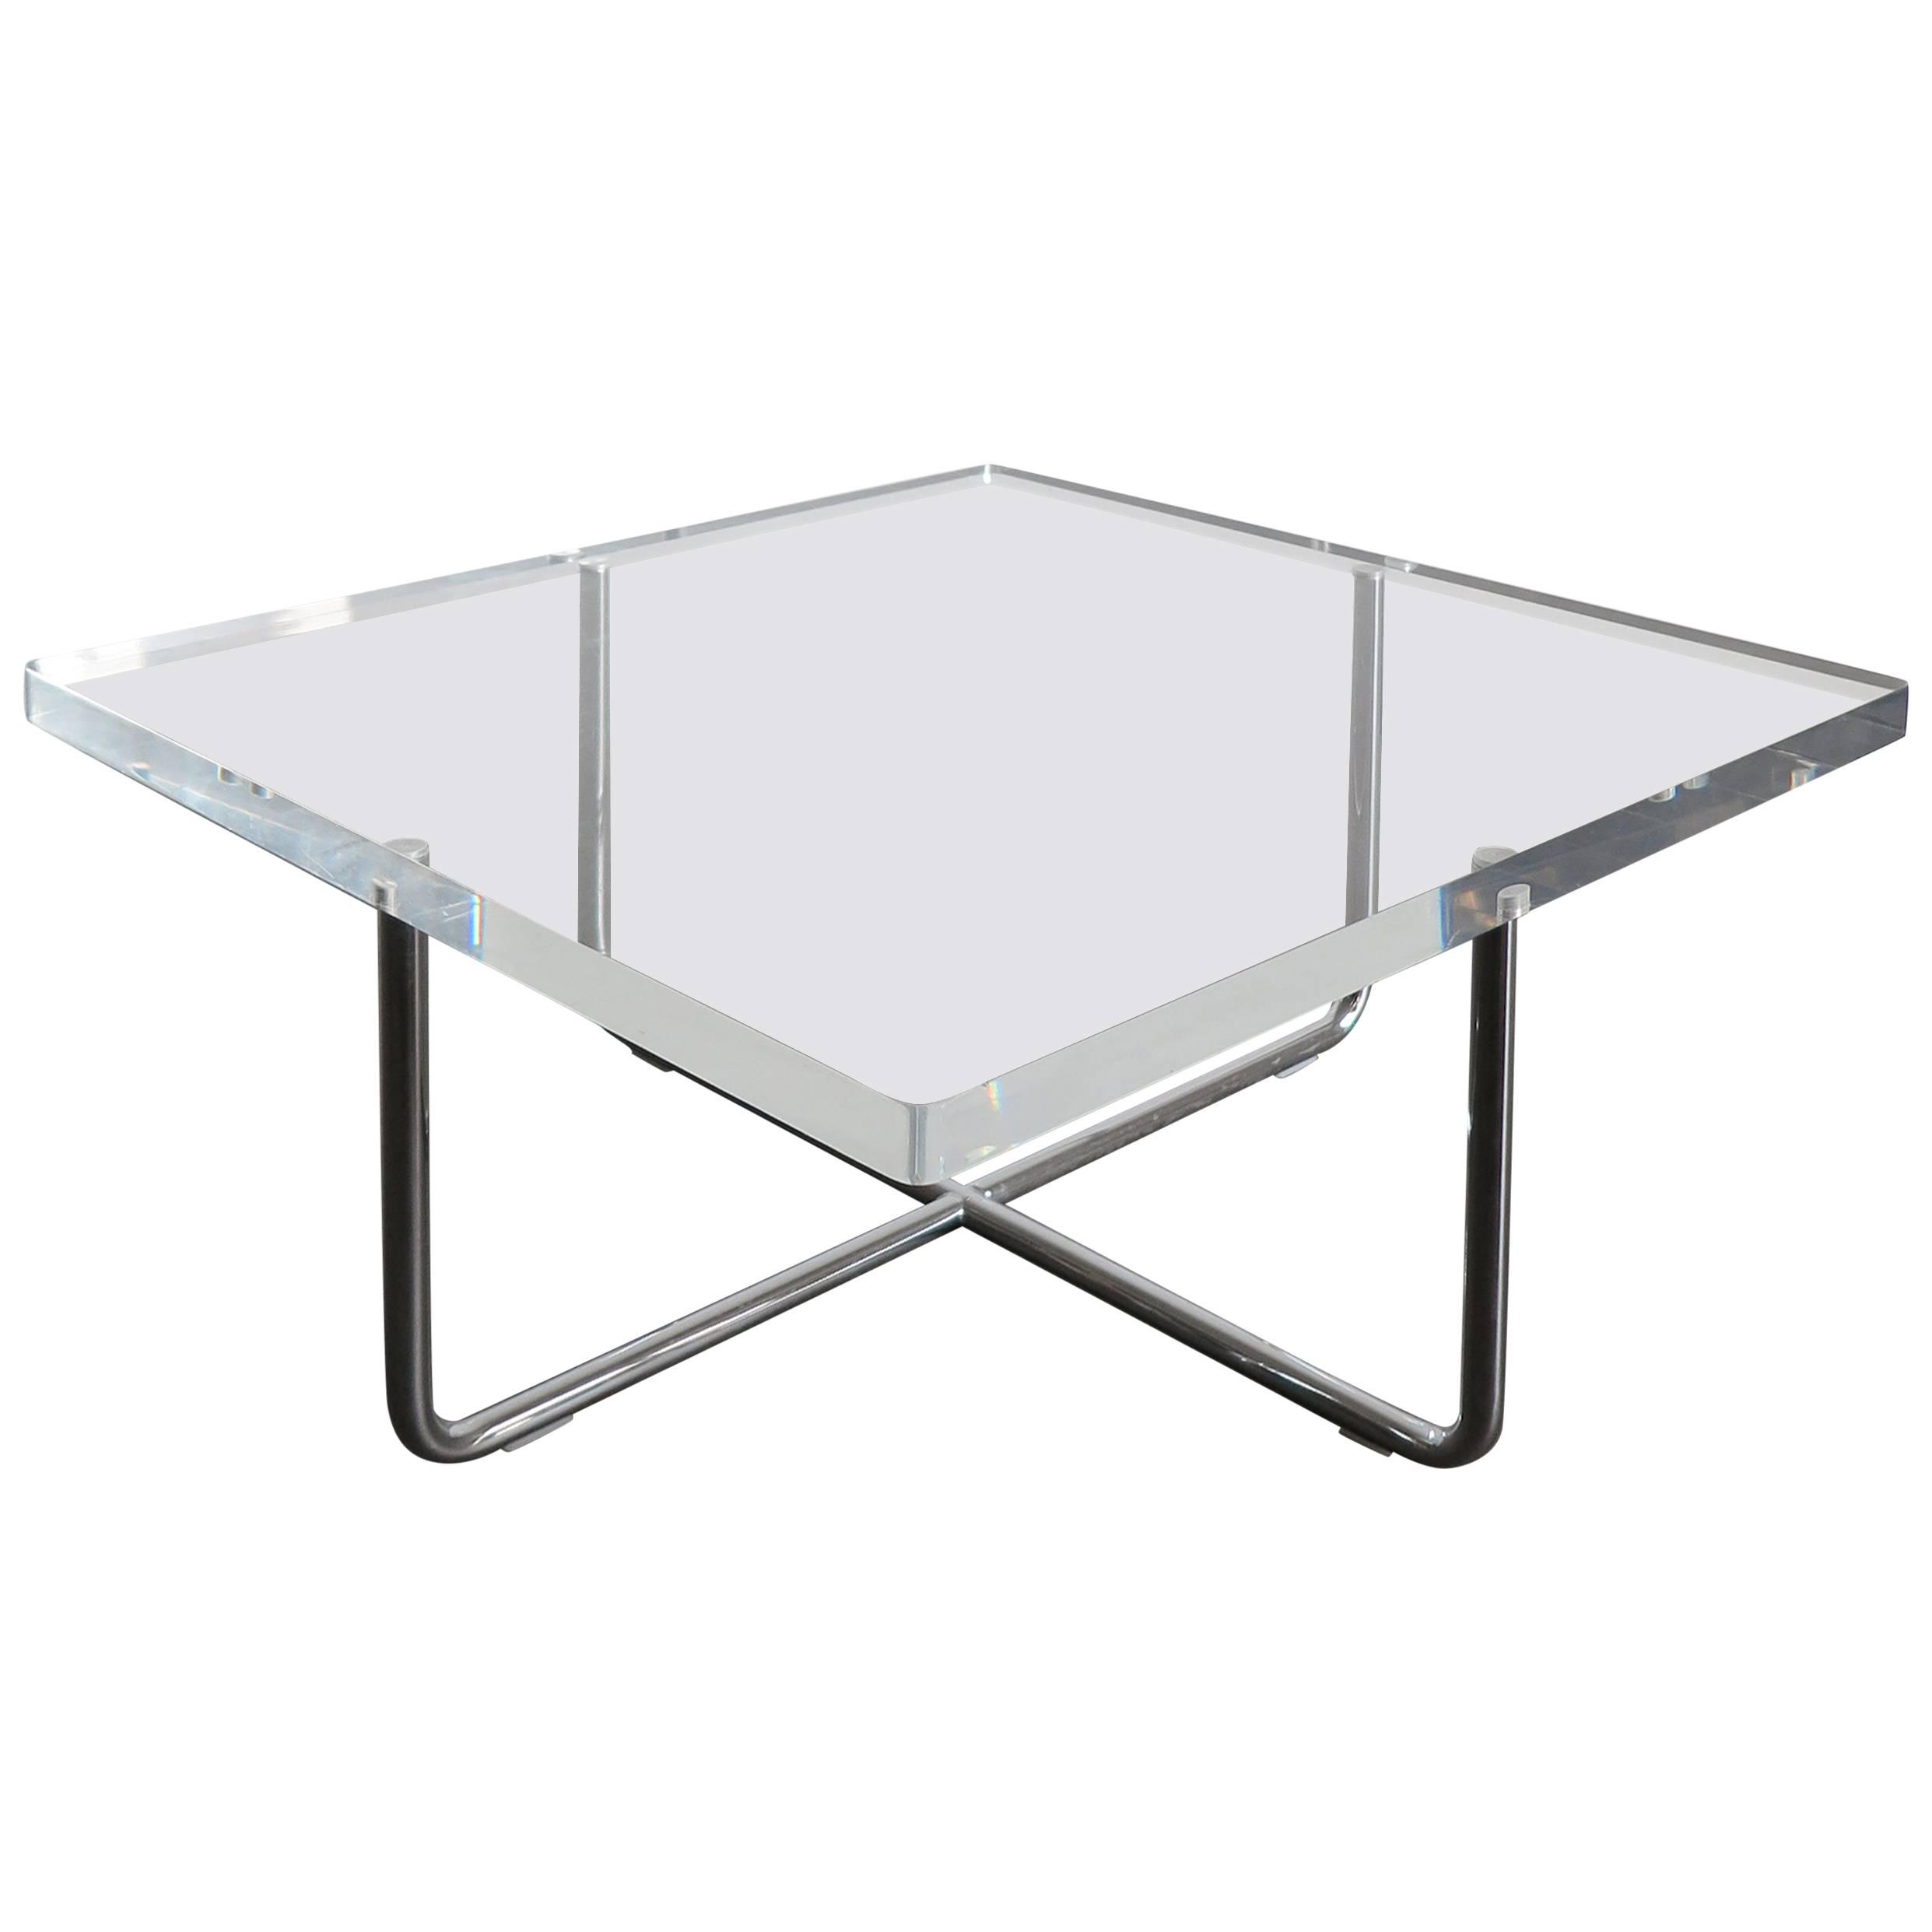 1990s Italian Square Plexiglass Modern Coffee Table Produced with regard to sizing 2483 X 2483